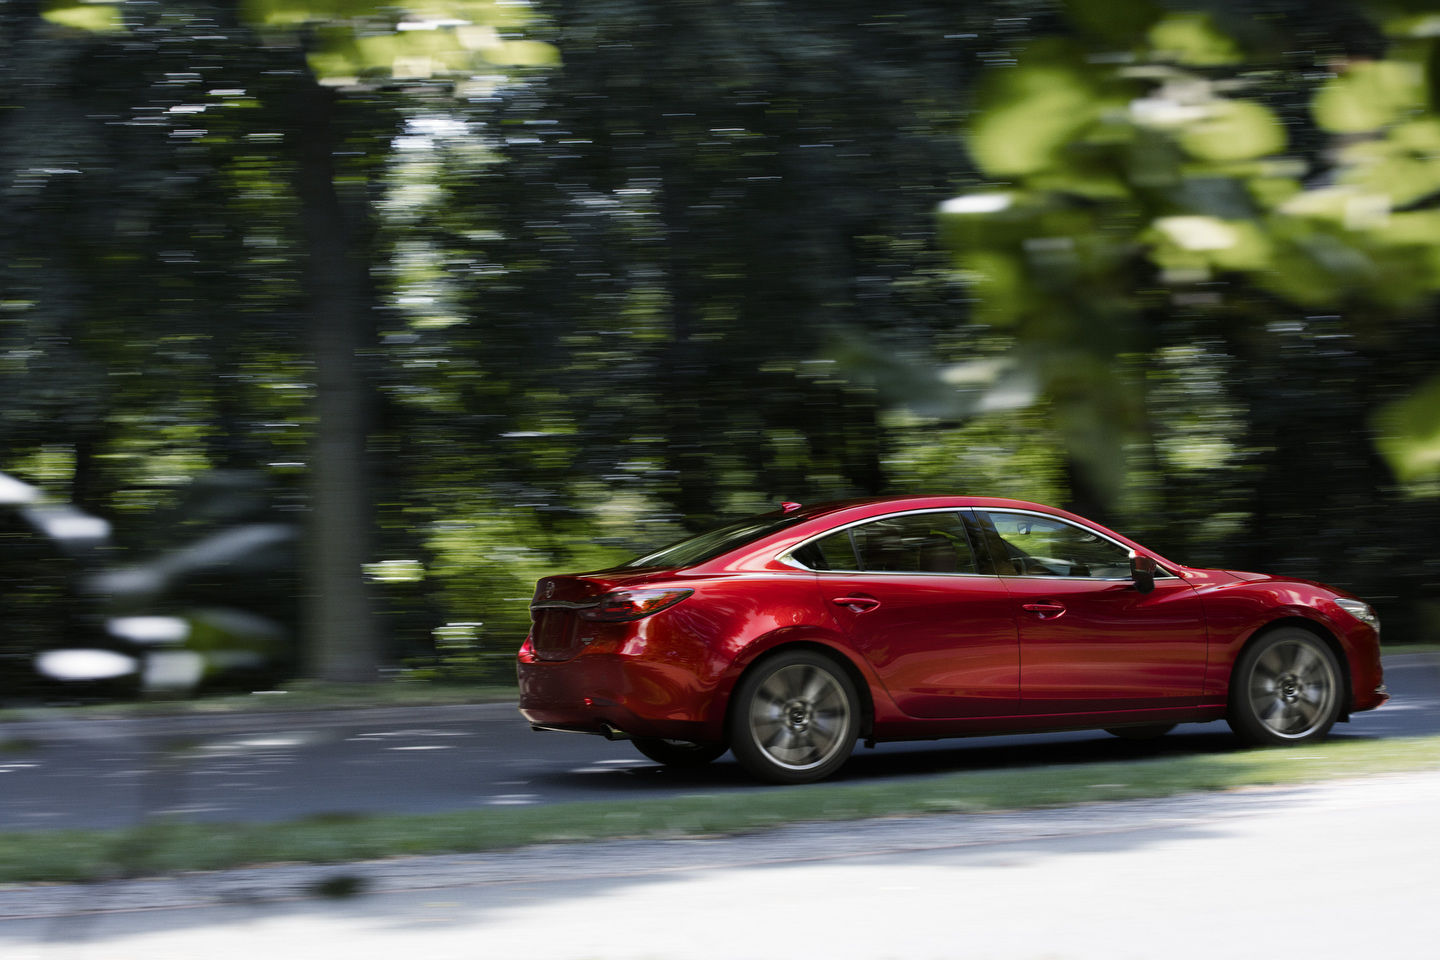 Mazda records another strong month of sales in June